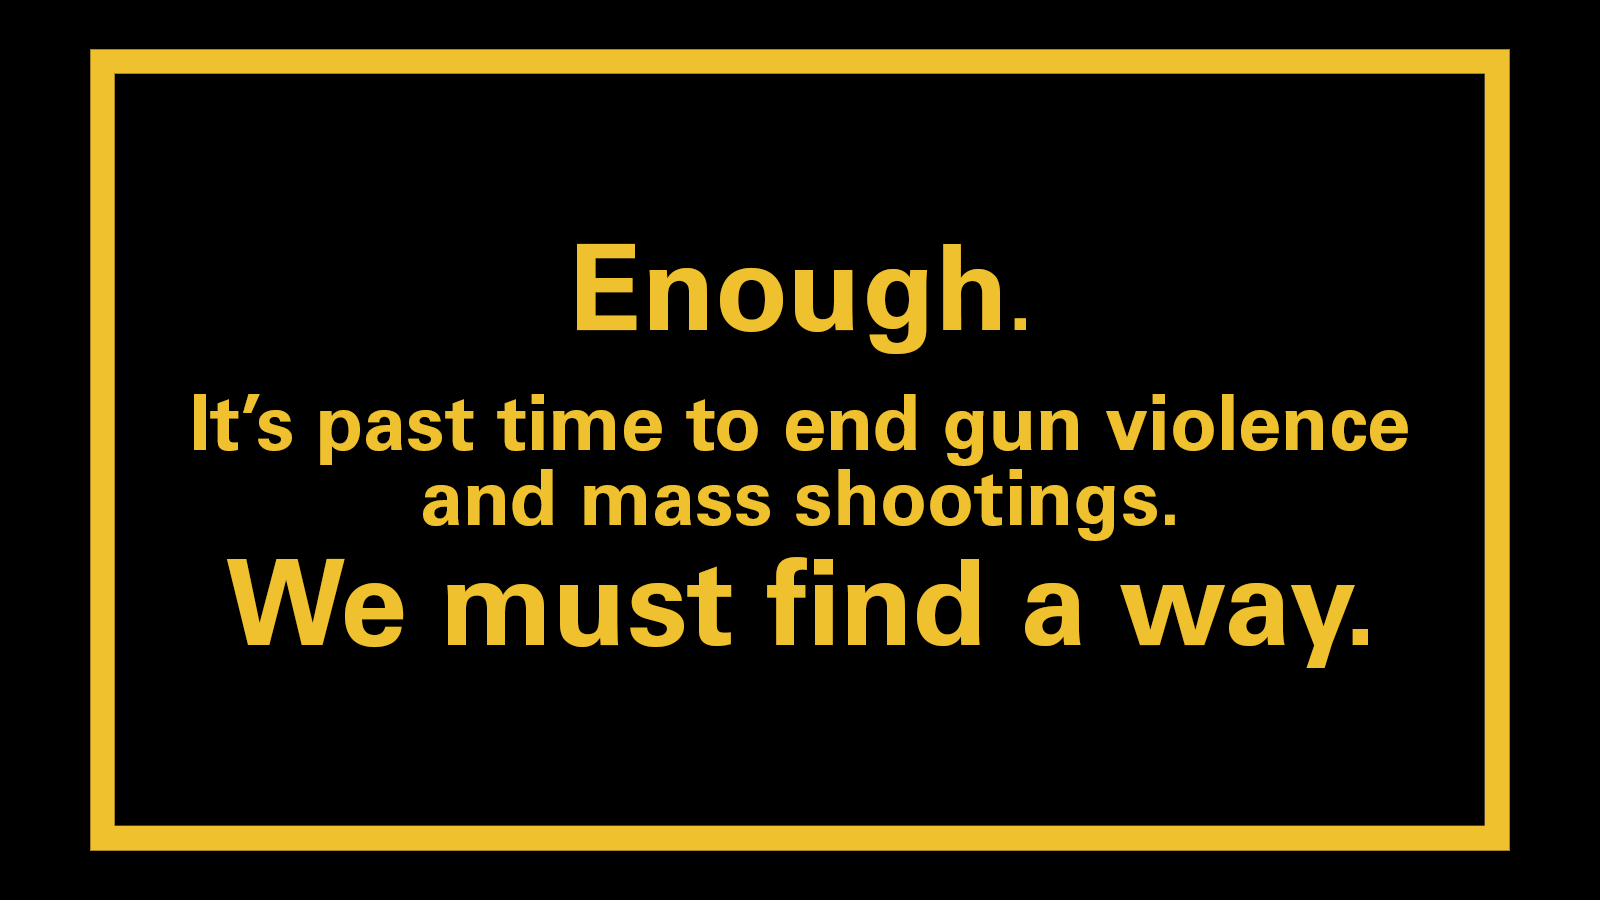 Enough. It's past time to end gun violence and mass shootings. We must find a way. 